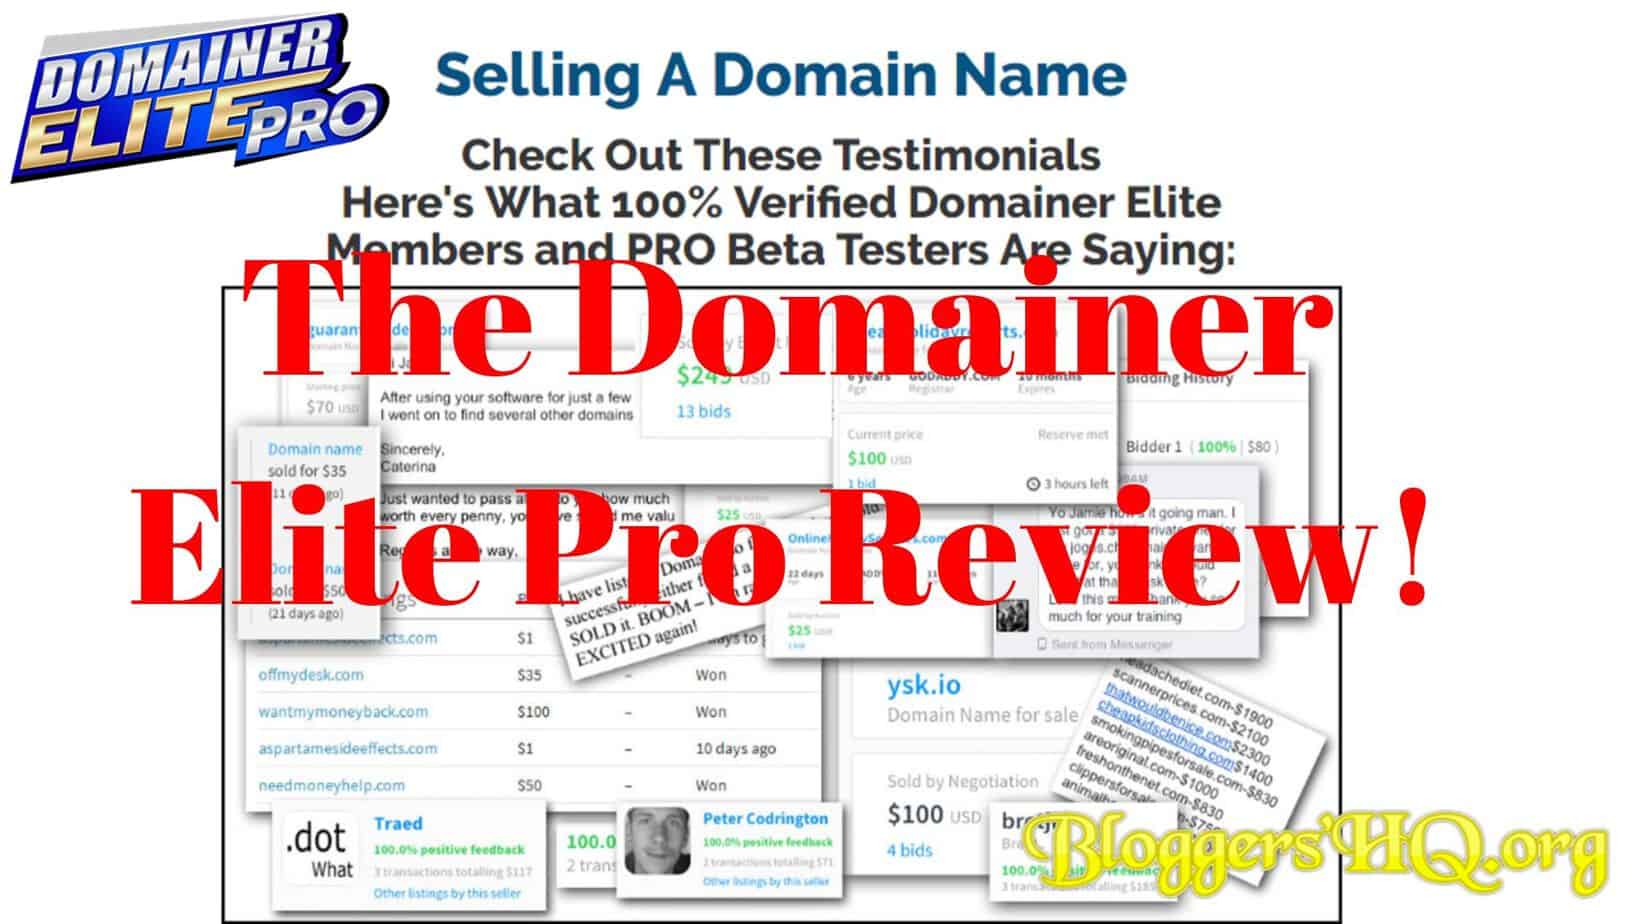 domainer elite software review